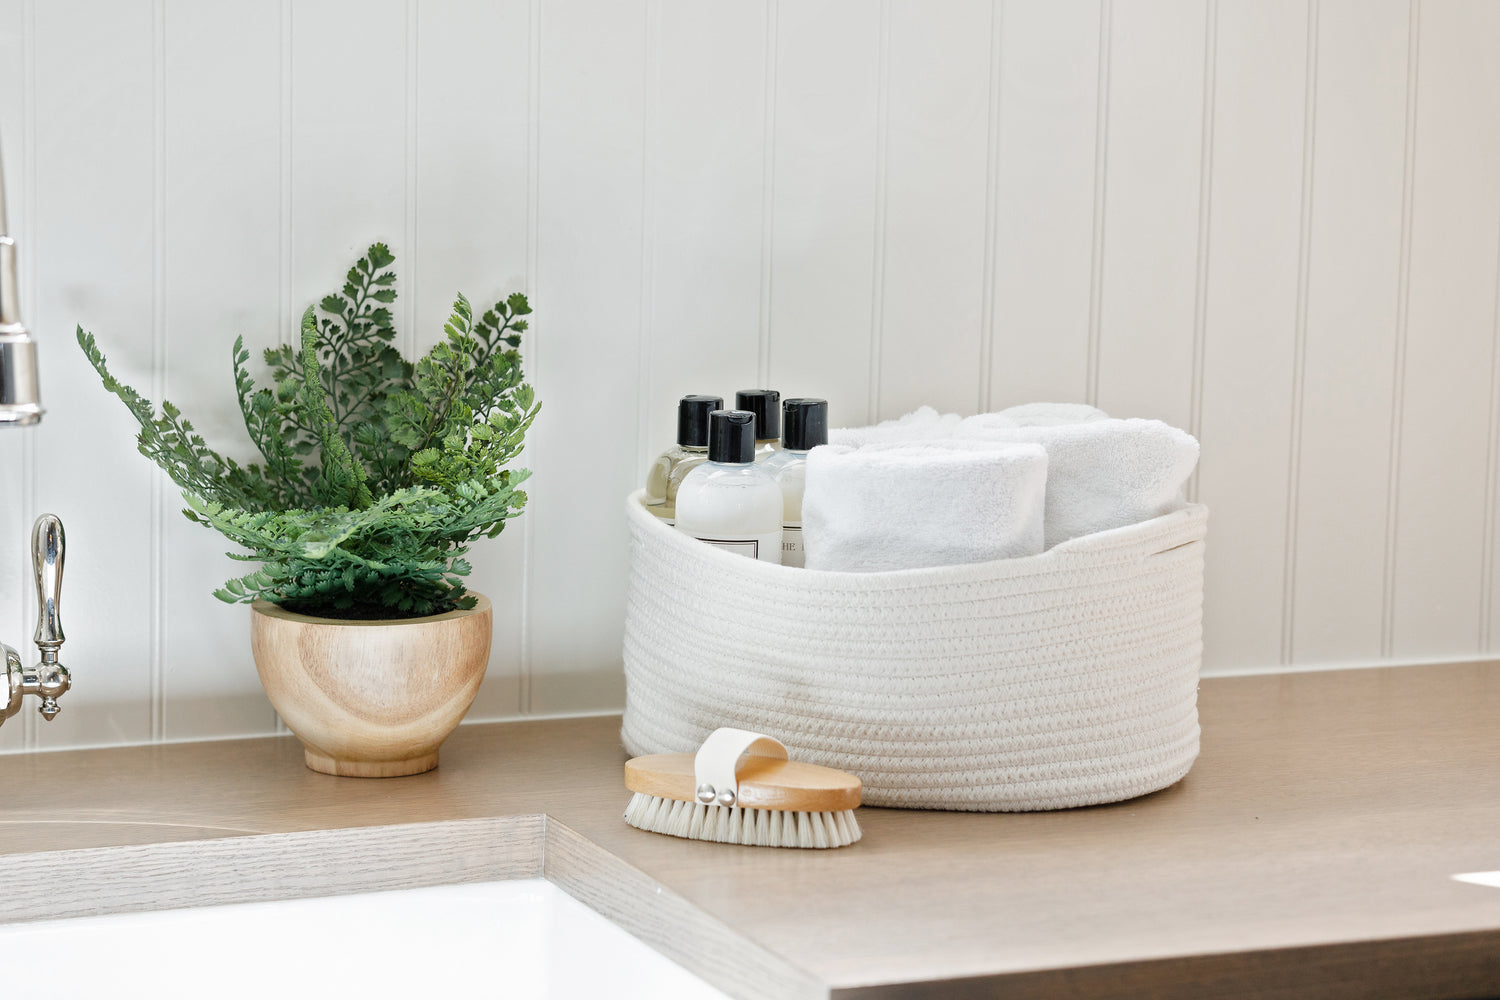 Laundry room counter top with a white Alpine basket filled with soap and towels.